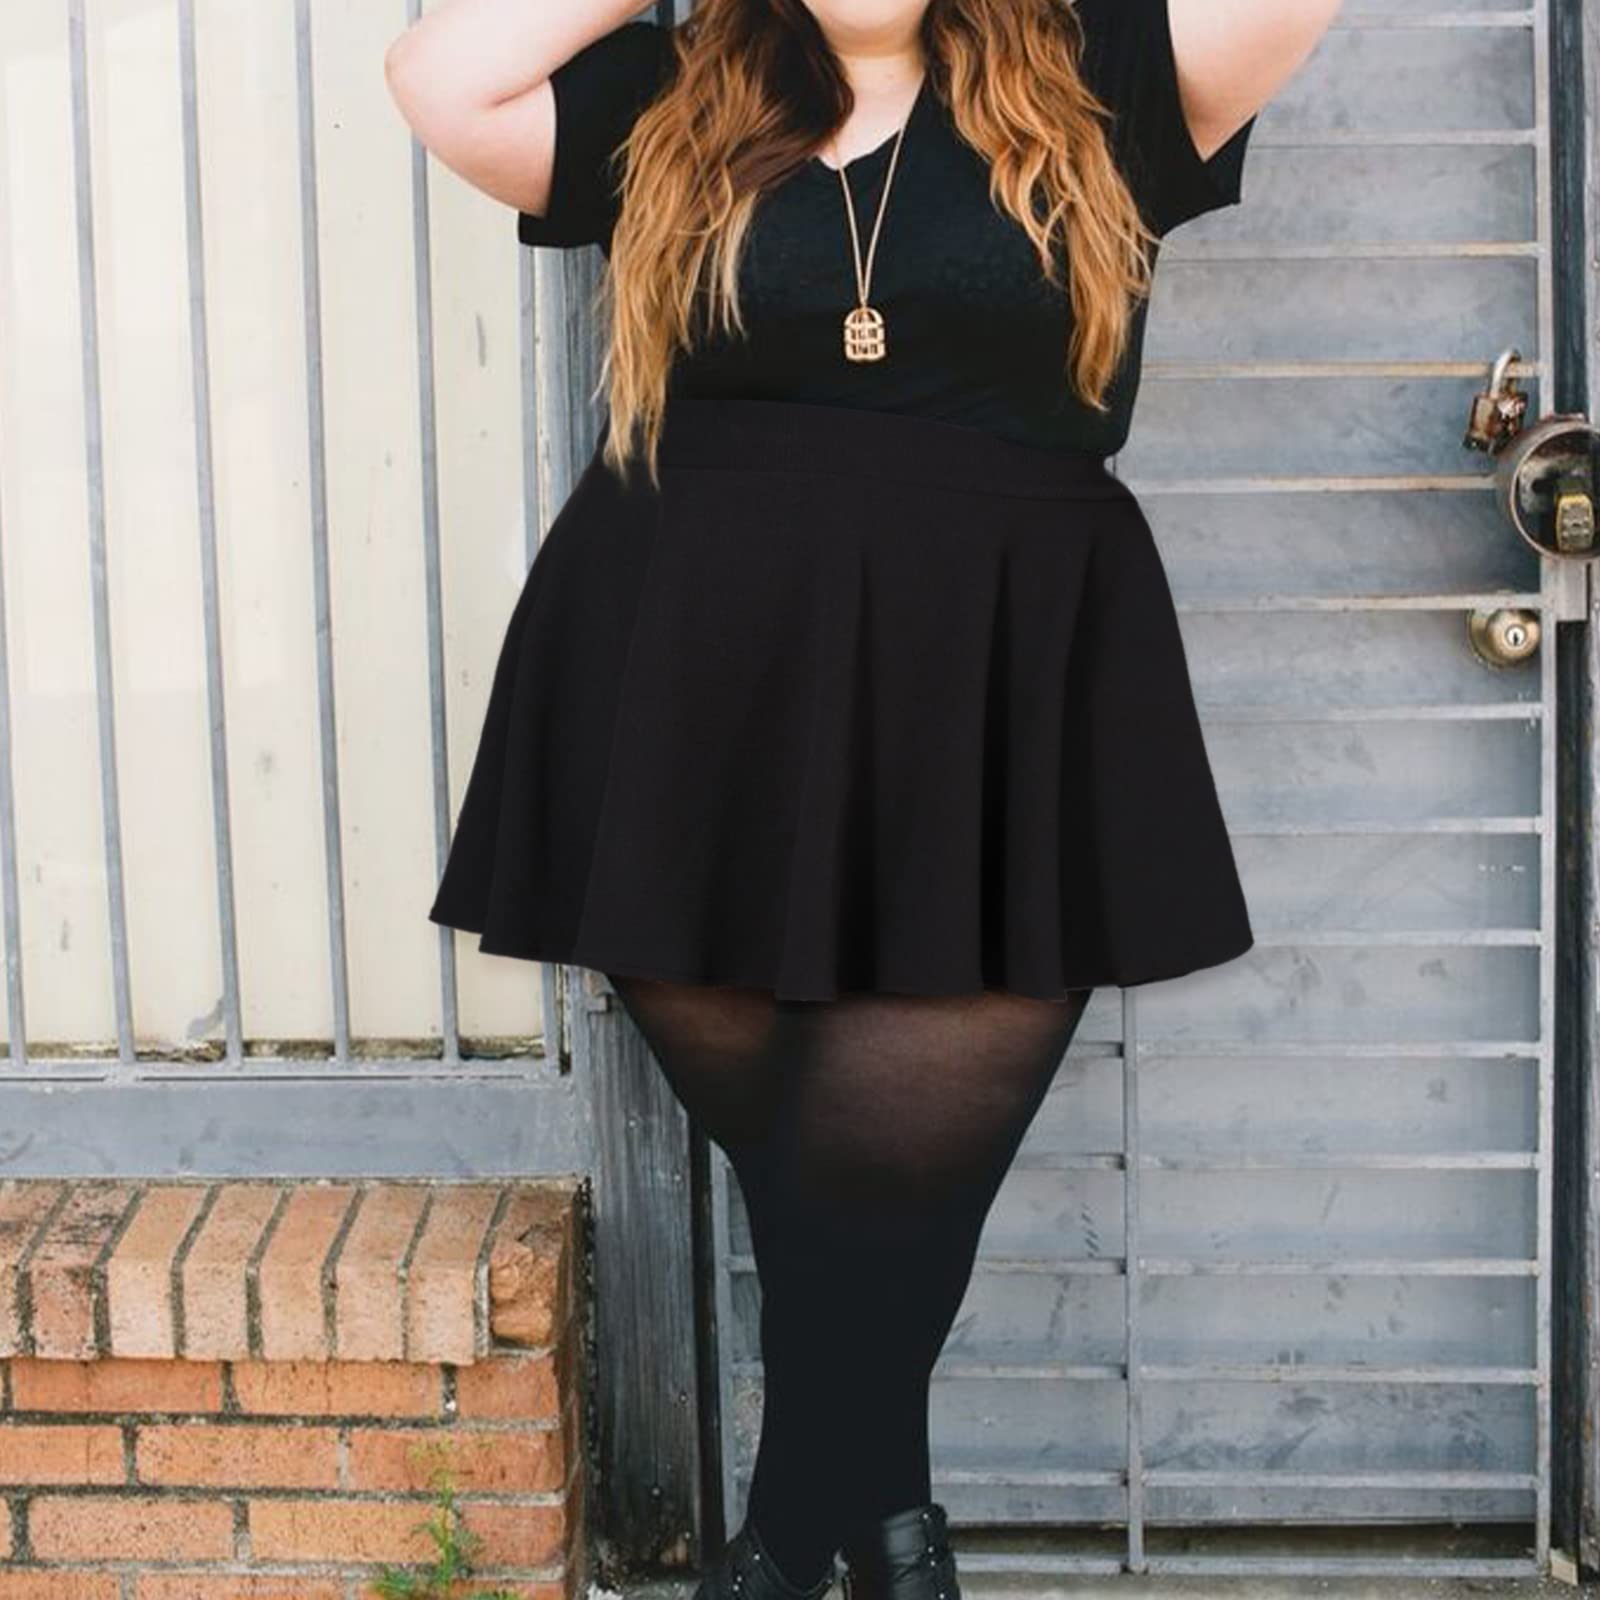 What tights do you recommend when wearing a black skirt? - Quora